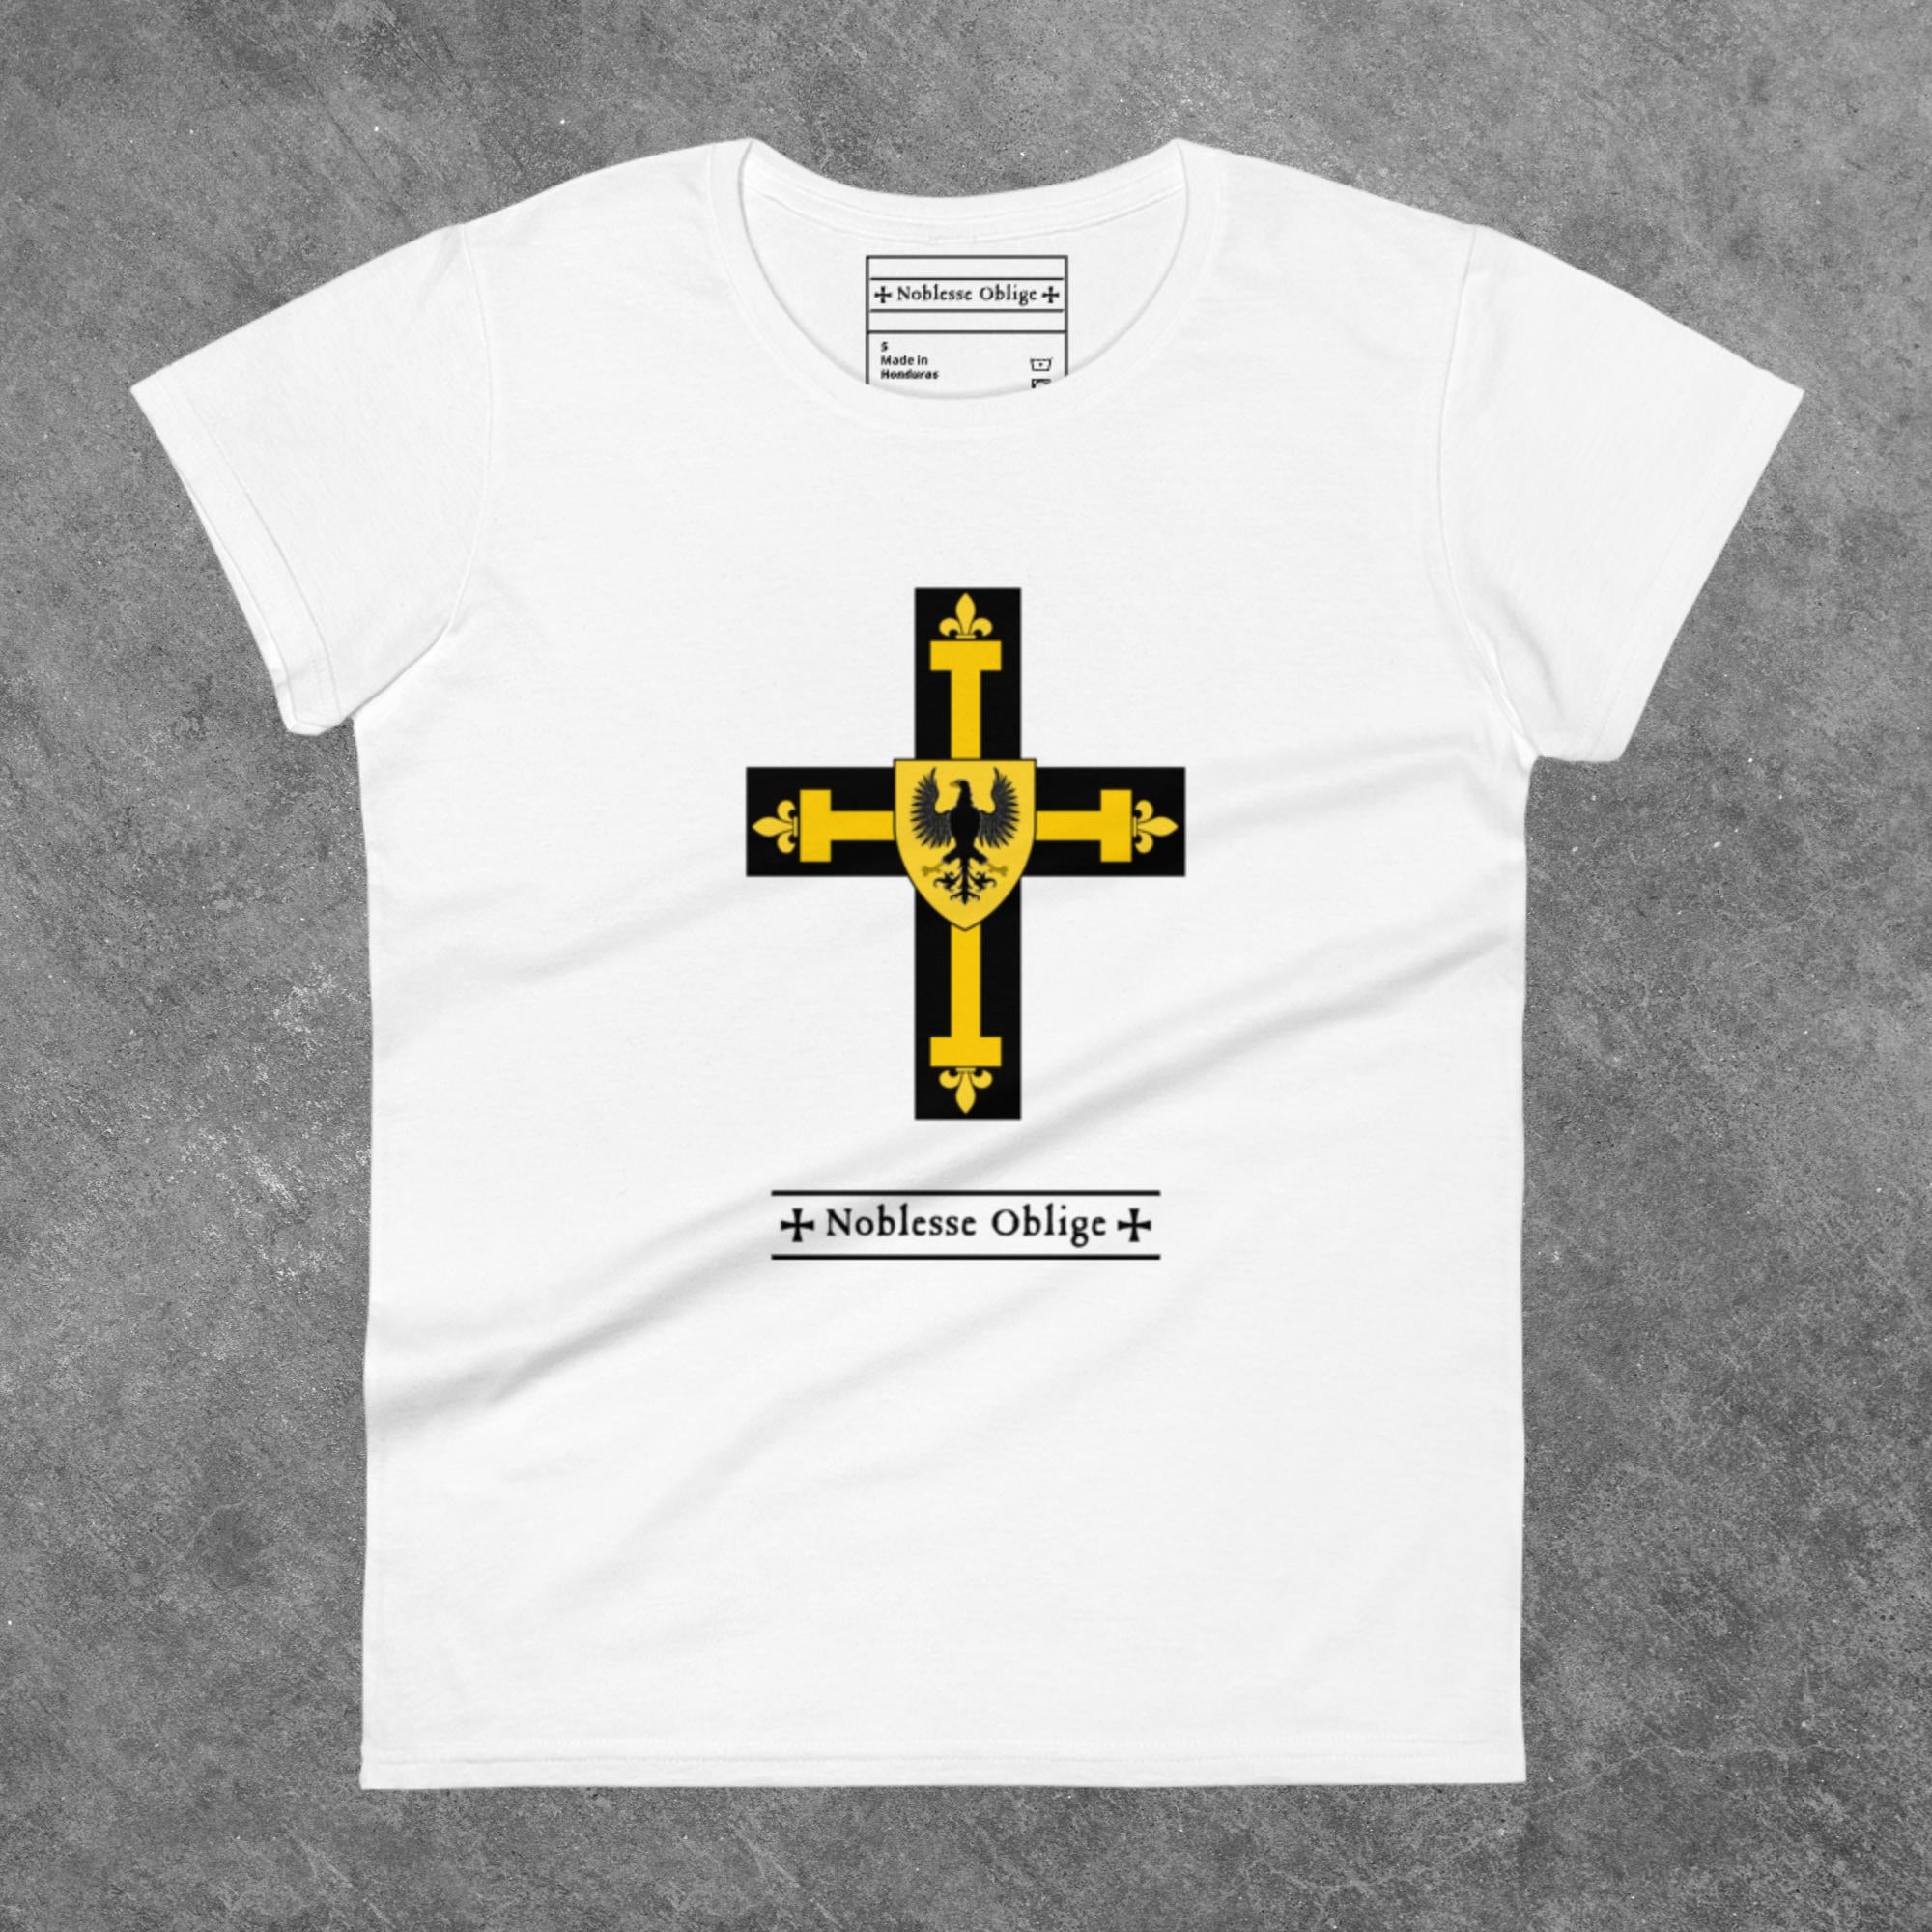 Teutonic Knight - Women's Fitted T-Shirt - Noblesse Oblige Apparel